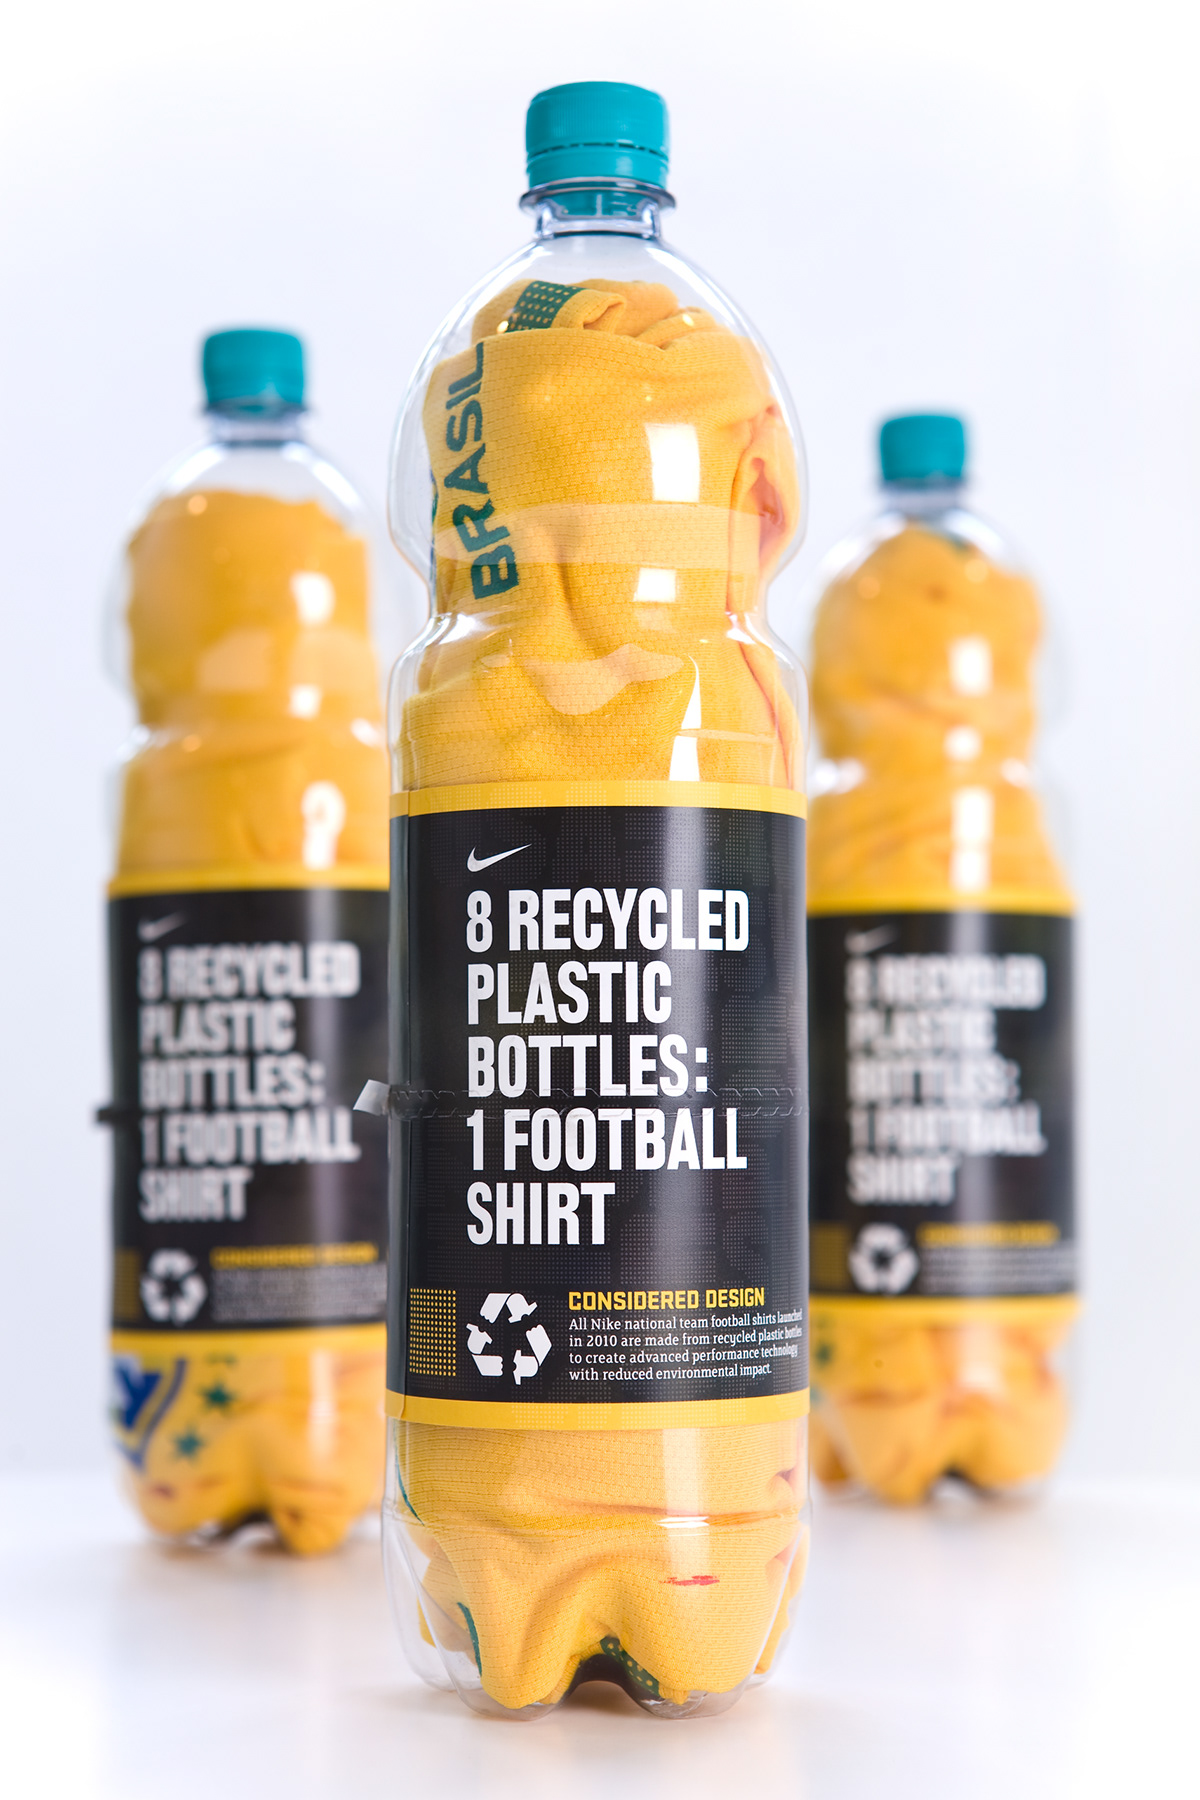 Nike oy pr recycle football shirt plastic press release